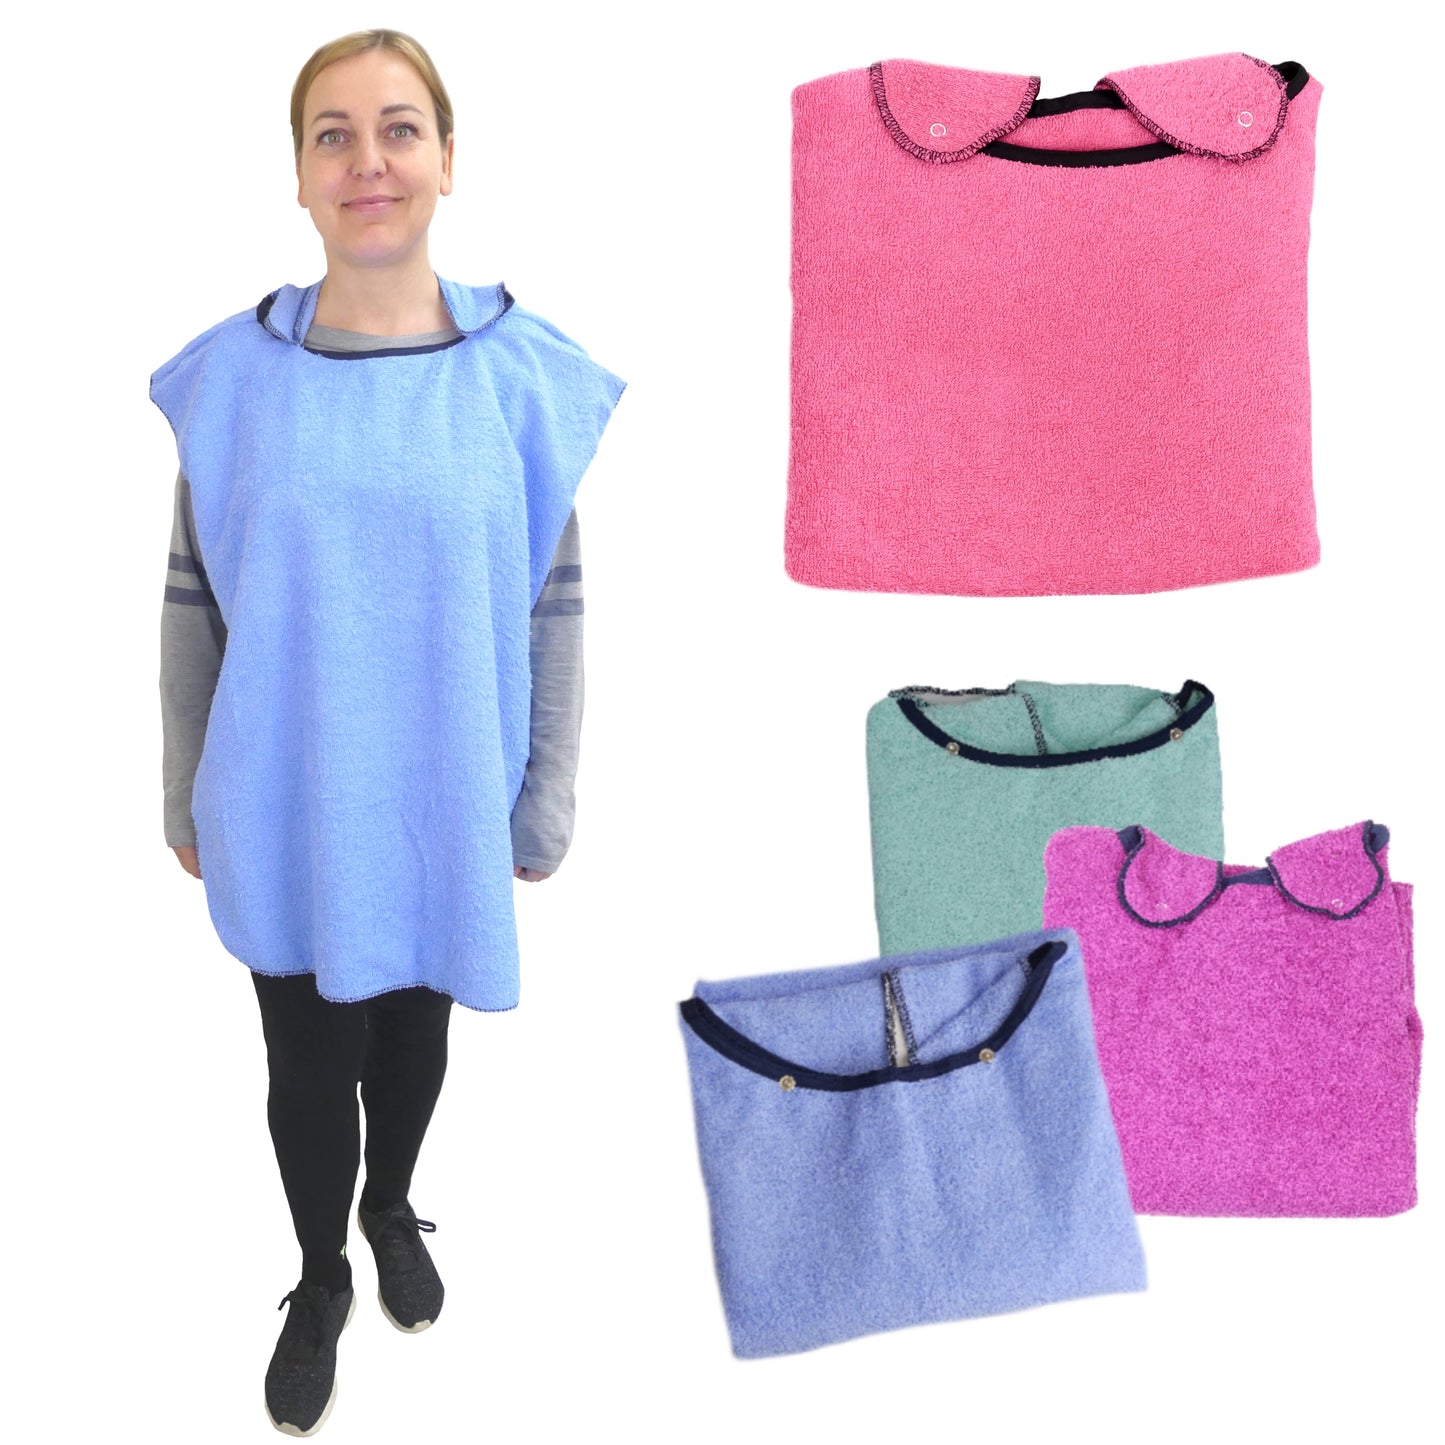 Eating and Drinking Aids: Towelling Feeding Cape with Waterproof Backing - M027